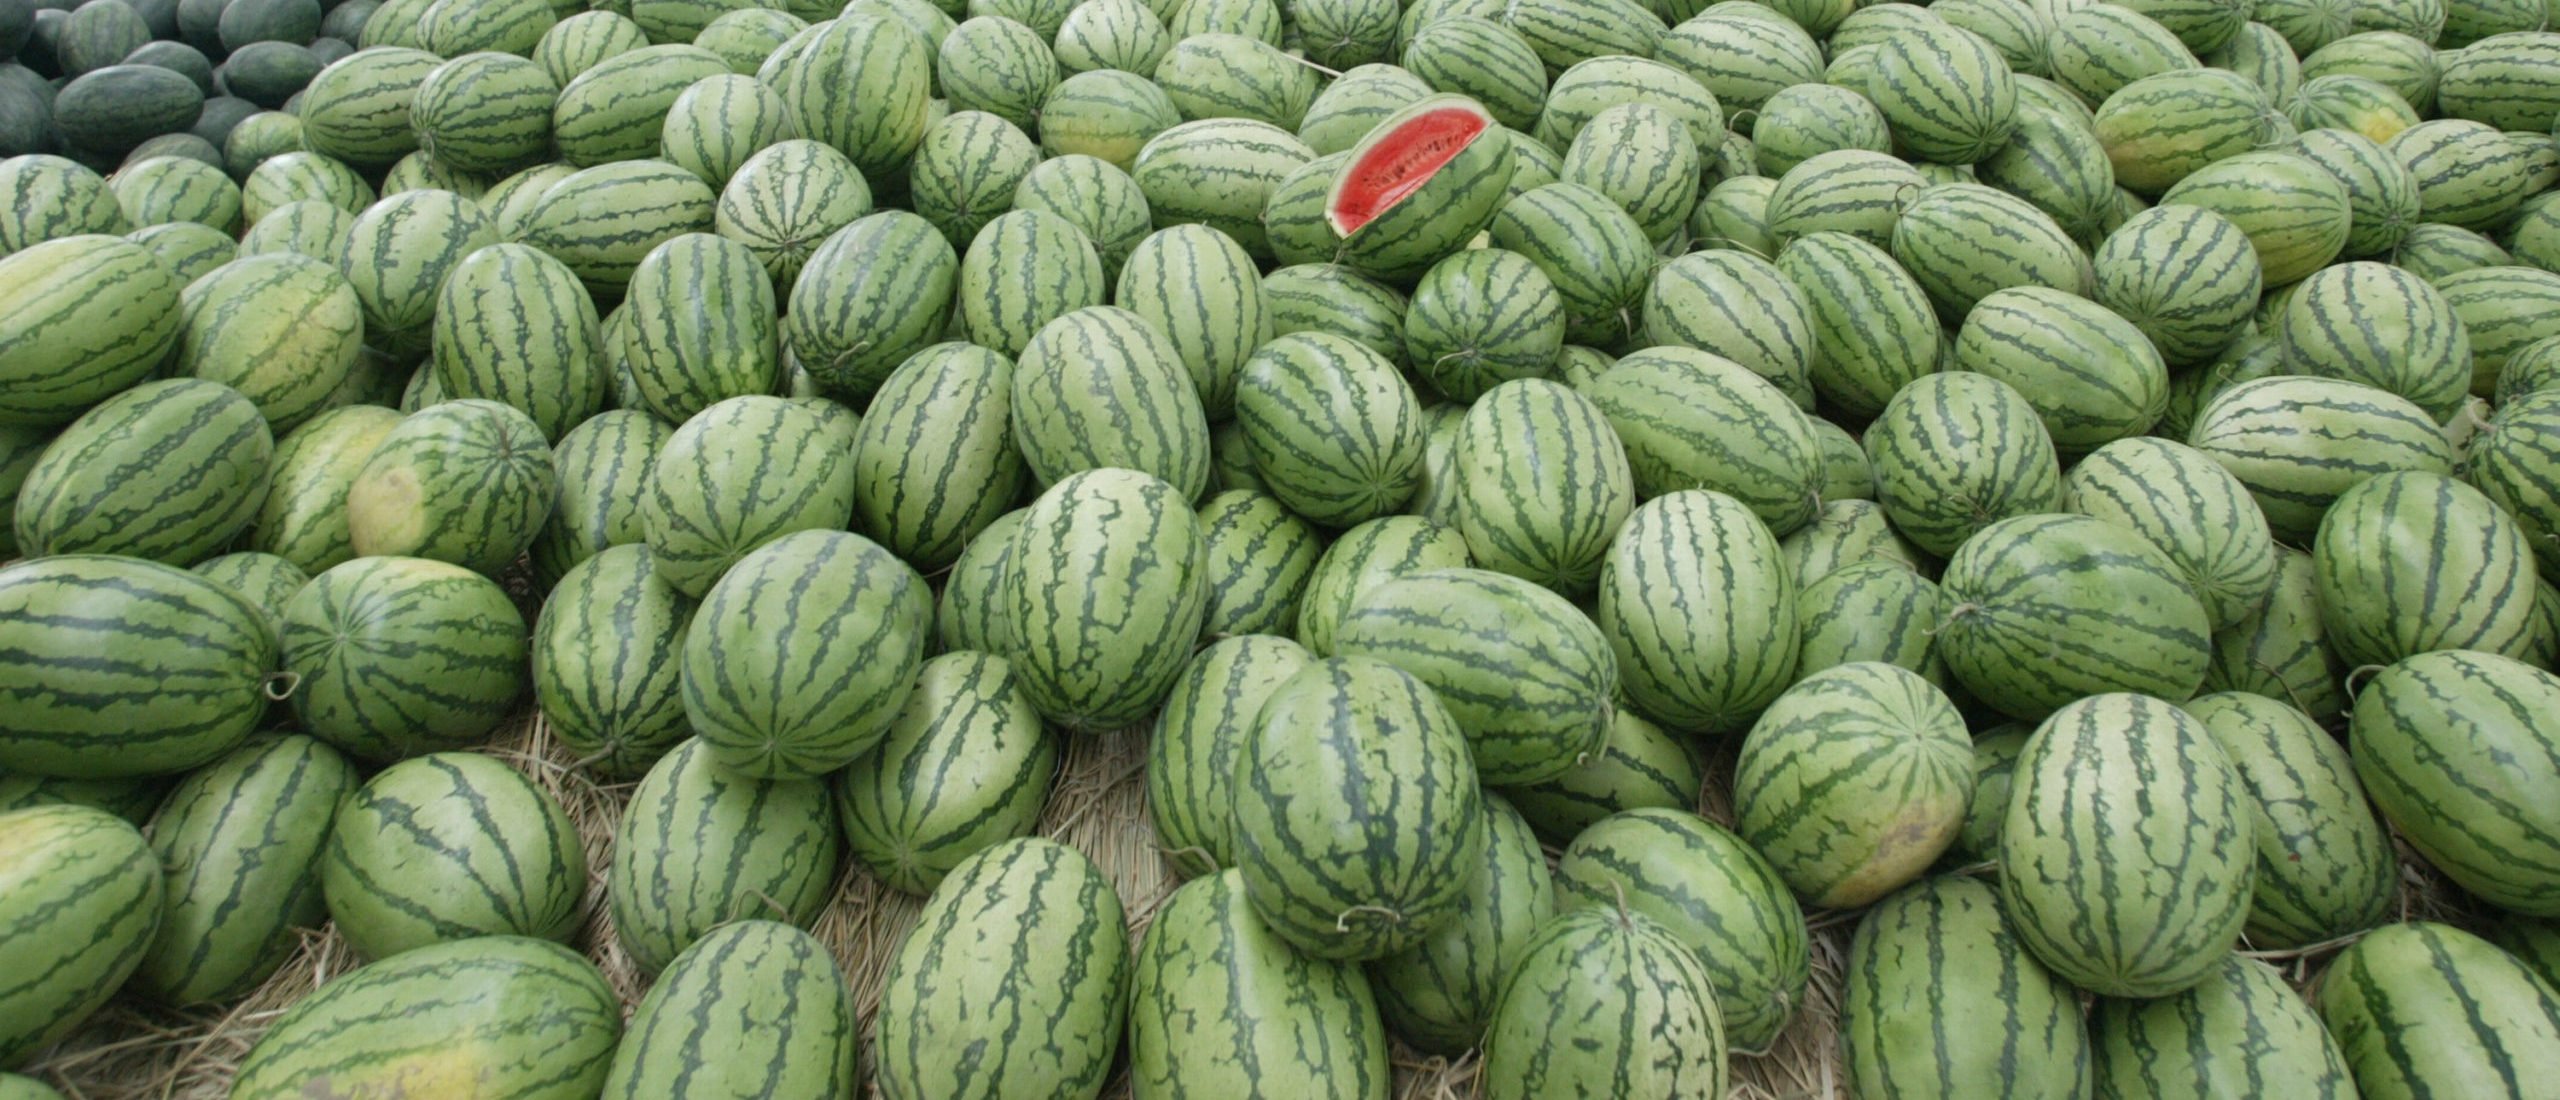 New York Times Says Story About Fruit Aliens Putting Watermelons On Mars Was Published In Error